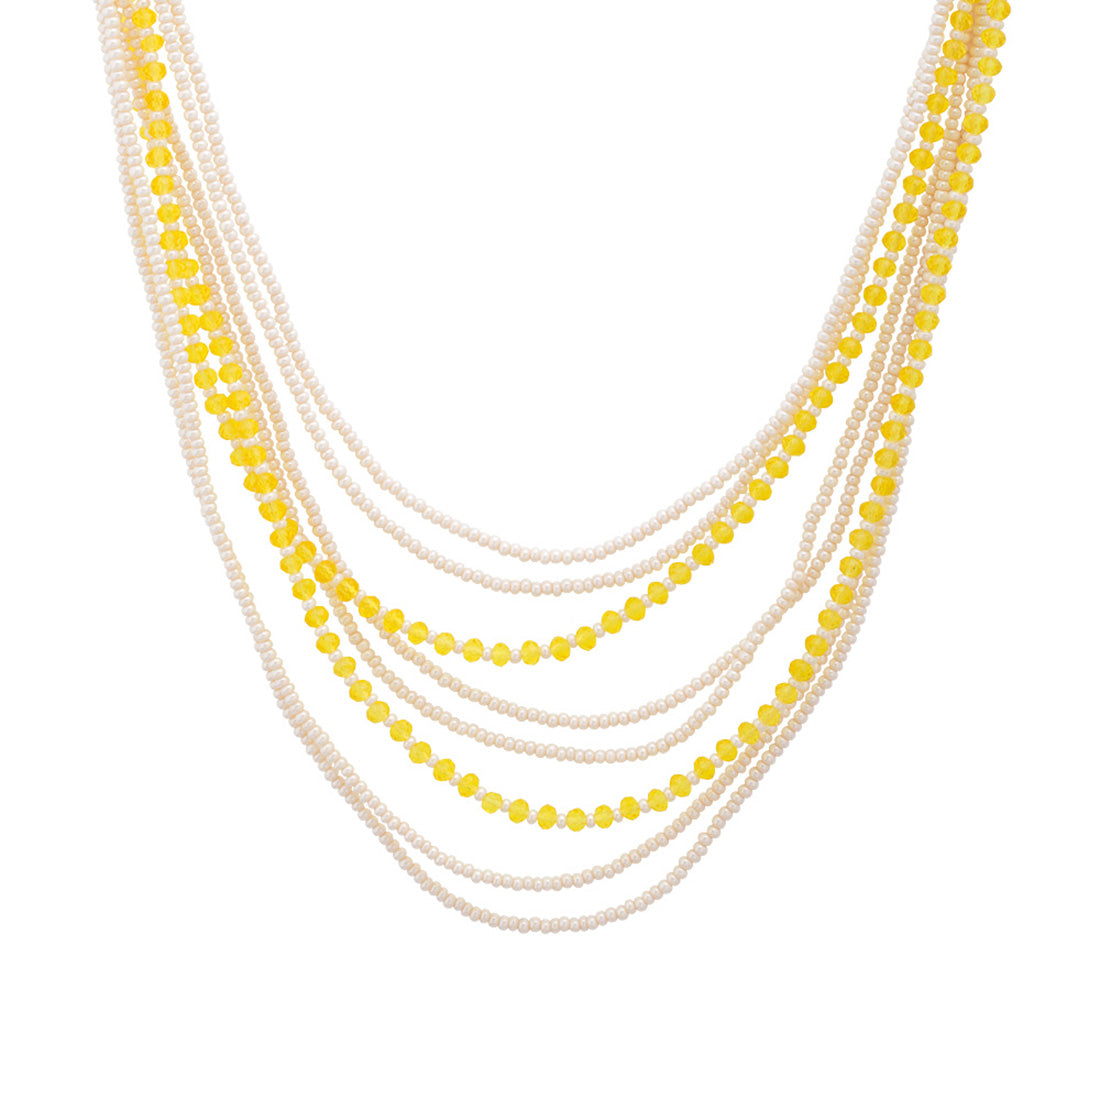 Multi Layer Pearl and Yellow Beads Necklace